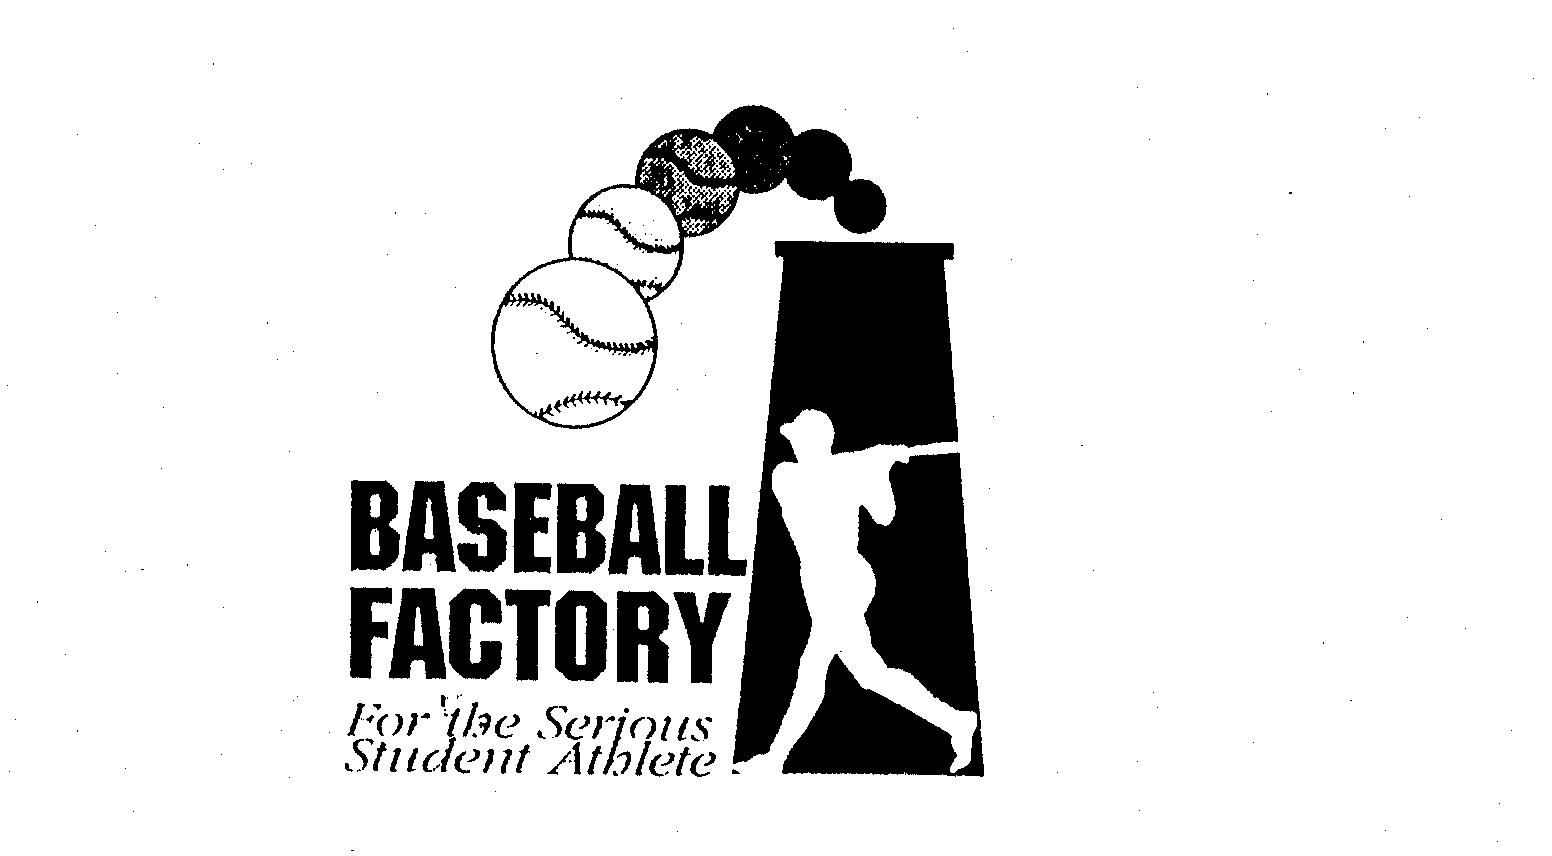  BASEBALL FACTORY FOR THE SERIOUS STUDENT ATHLETE